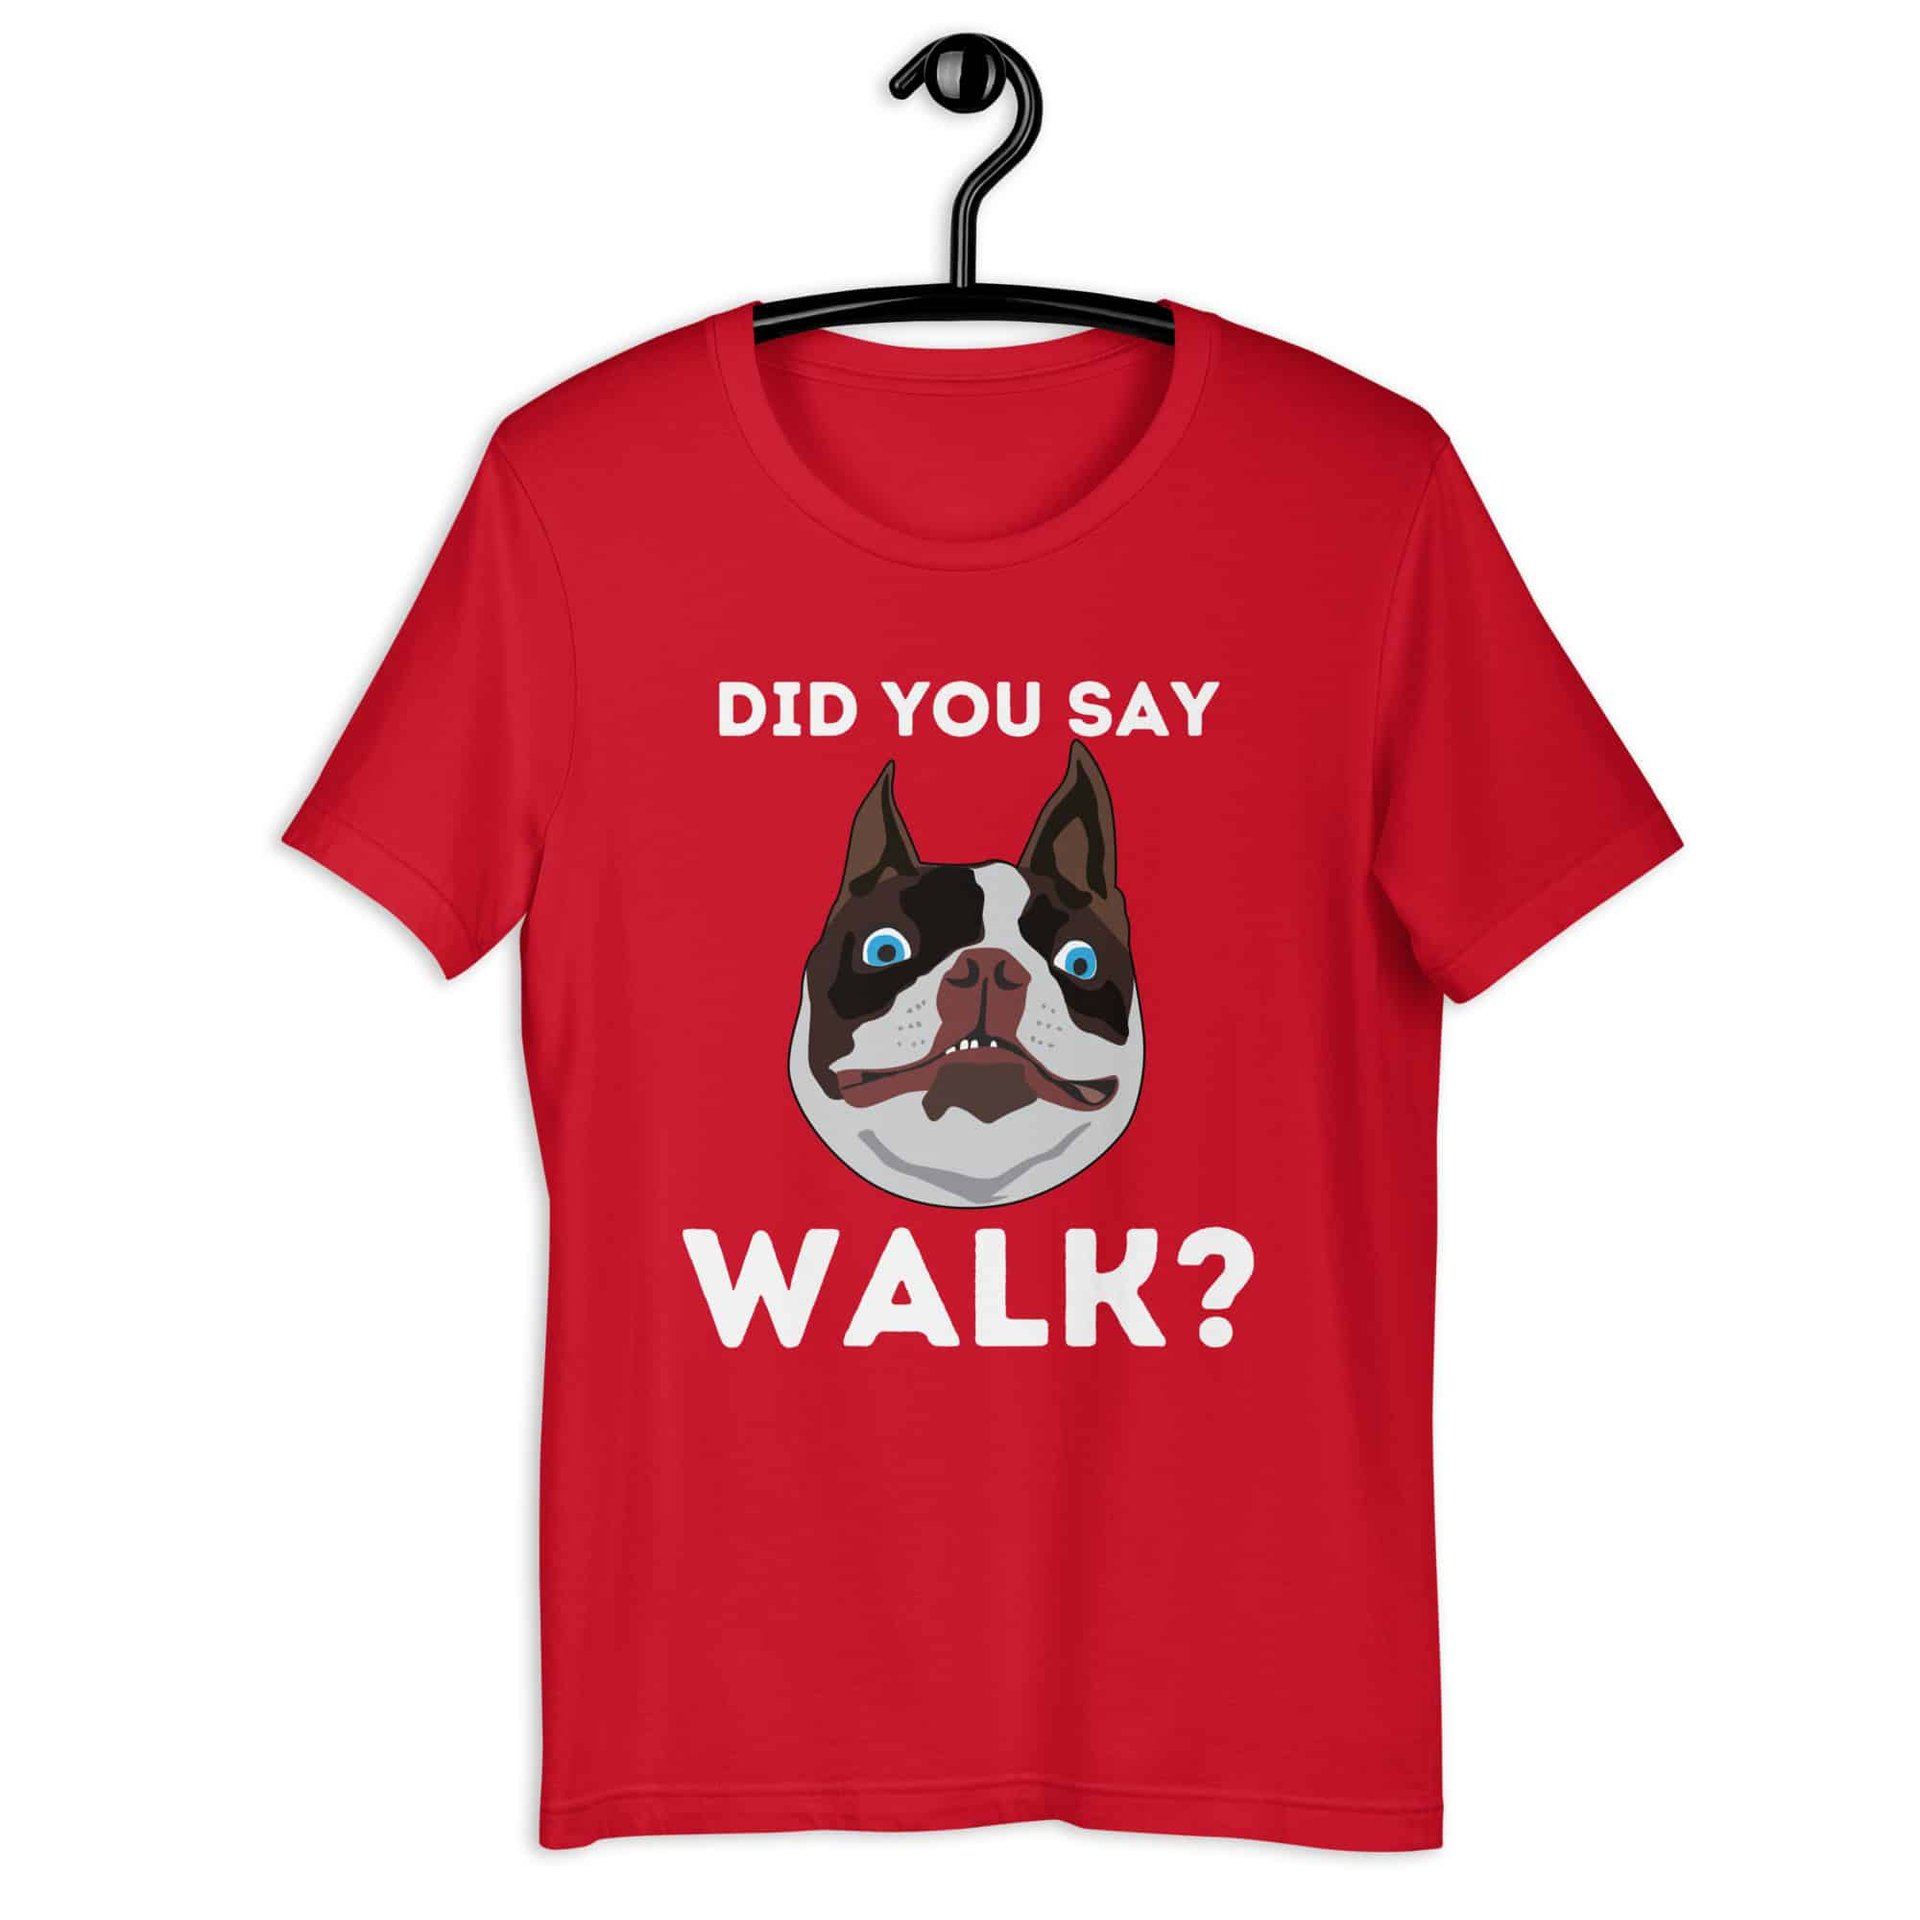 "Did You Say Walk?" Funny Dog Unisex T-Shirt. Red